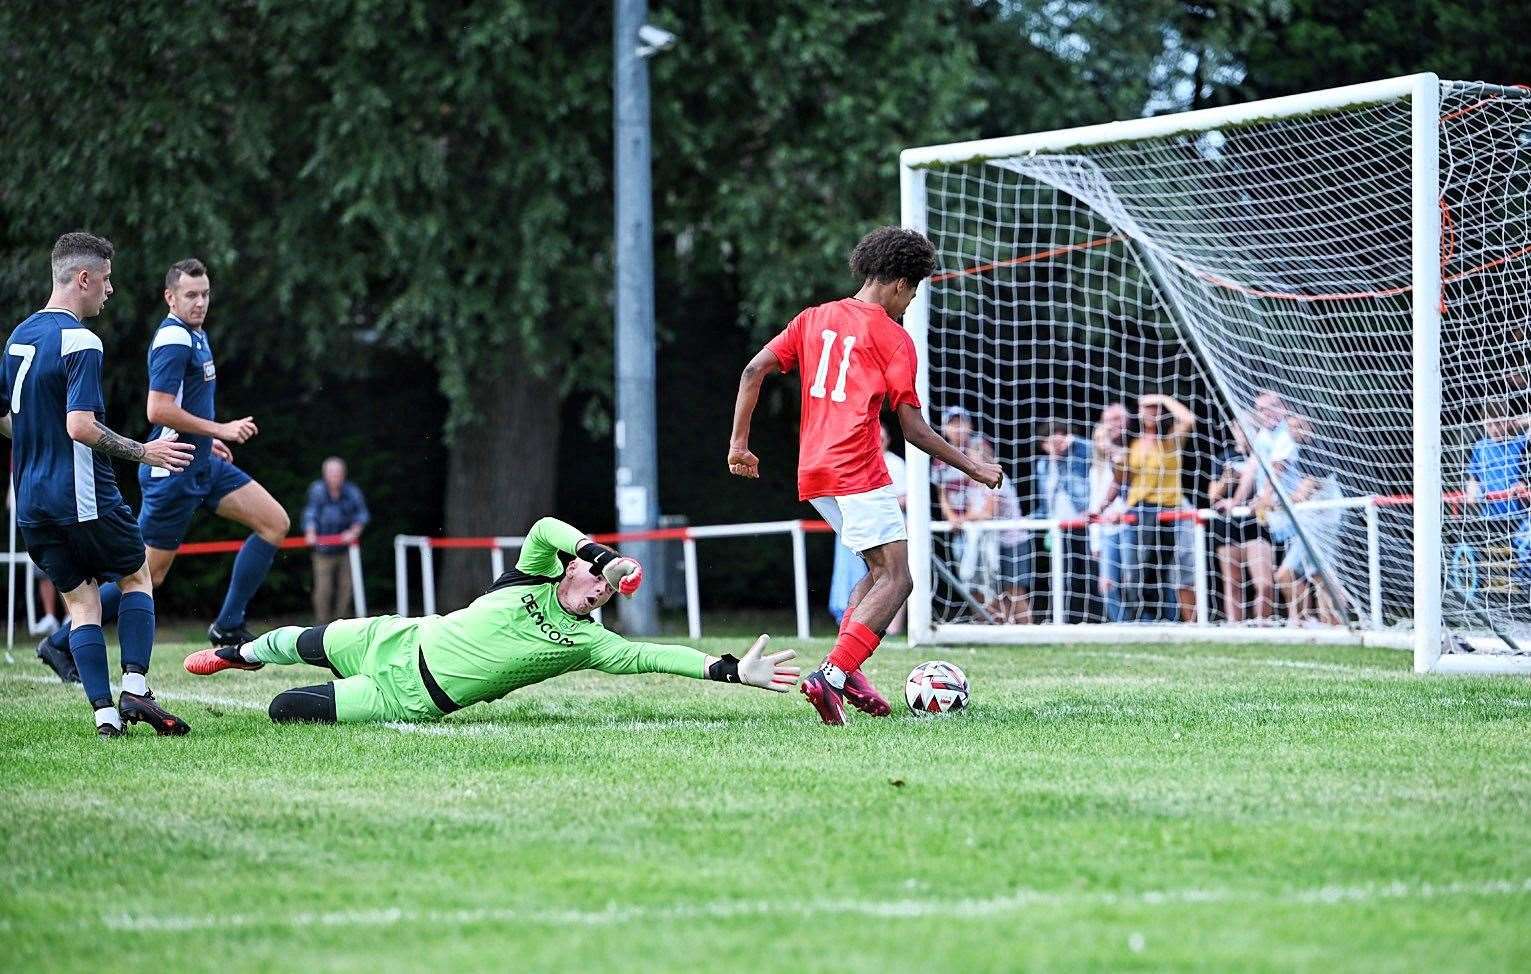 Downham Town v Ely City at the SCL Memorial Field. Magic Smalls taps home for the hosts. Picture: Ian Burt